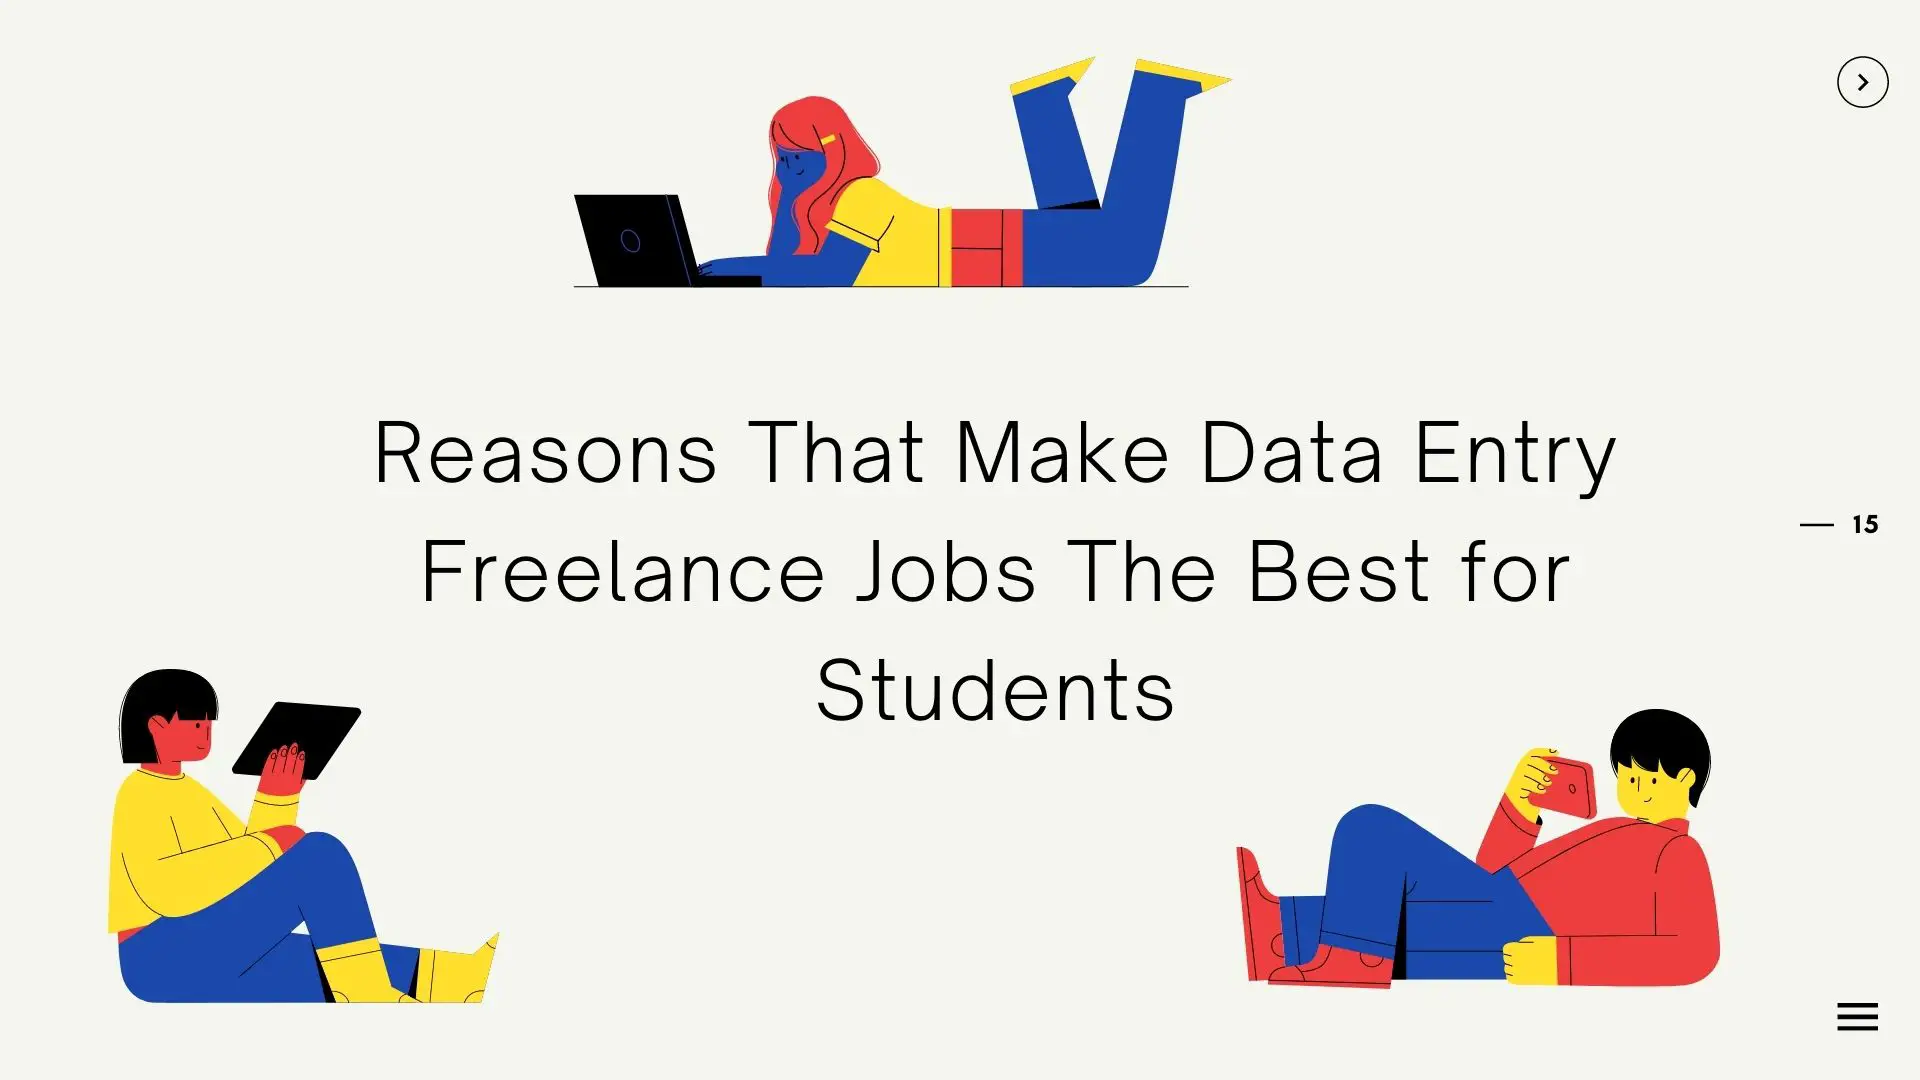 Reasons That Make Data Entry Freelance Jobs The Best for Students